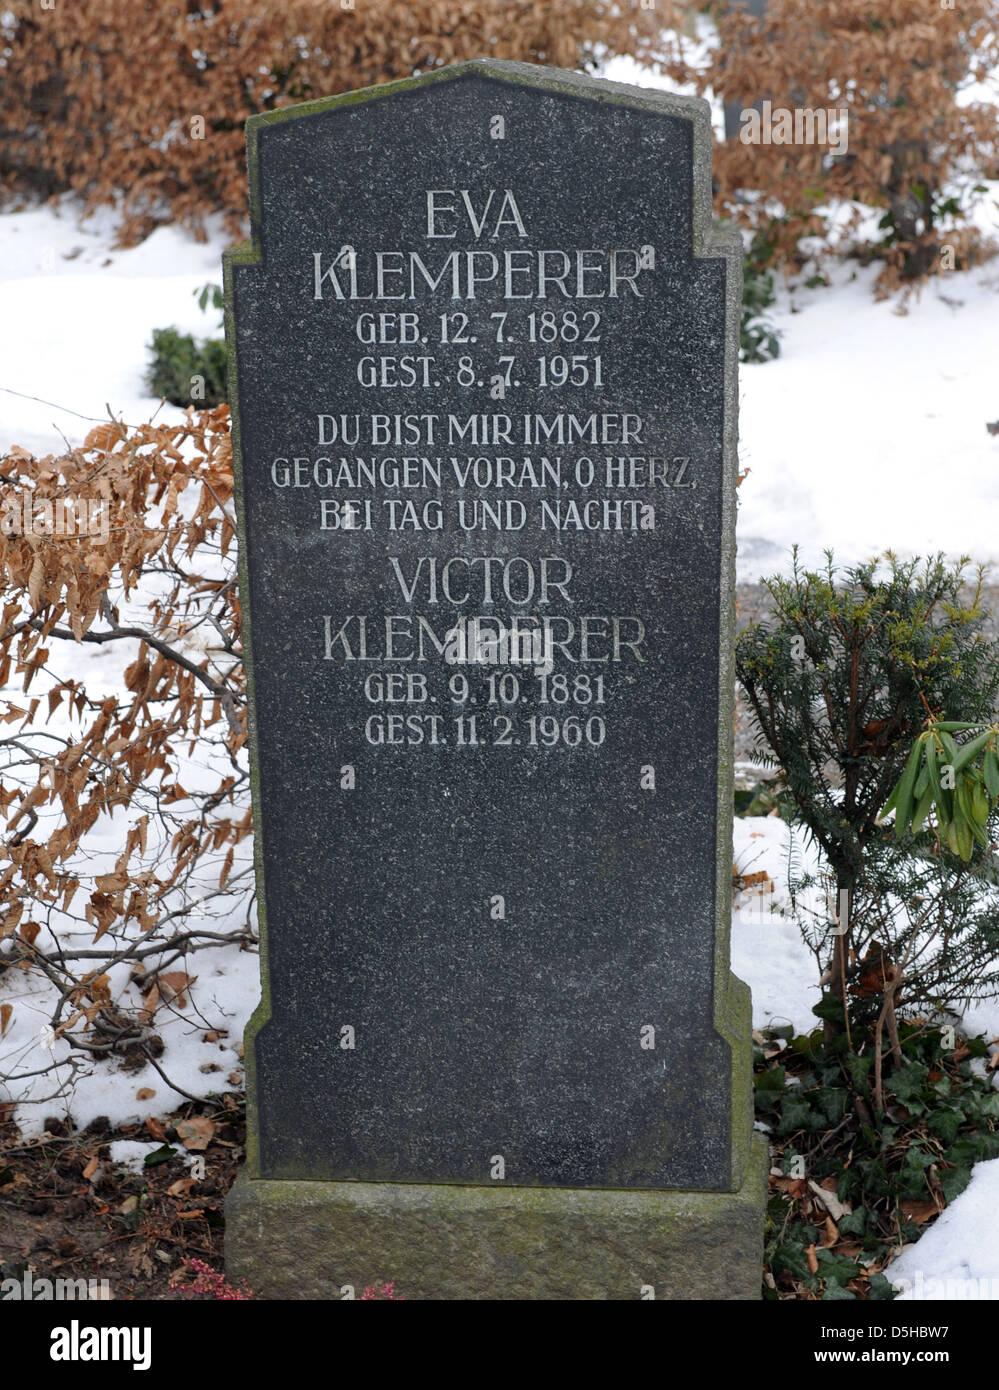 The grave of Victor Klemperer pictured in Dresden, Germany, 09 February 2010. Philologist Klemperer was born on 09 October 1881 in Landsberg and died on 11 February 1960 in Dresden. Klemperer's diaries, 'Ich will Zeugnis ablegen bis zum letzten' ('I want to witness to the last'), which were published in 1995 are considered a most impressive account of the Nazi regime from 1933 to 1 Stock Photo